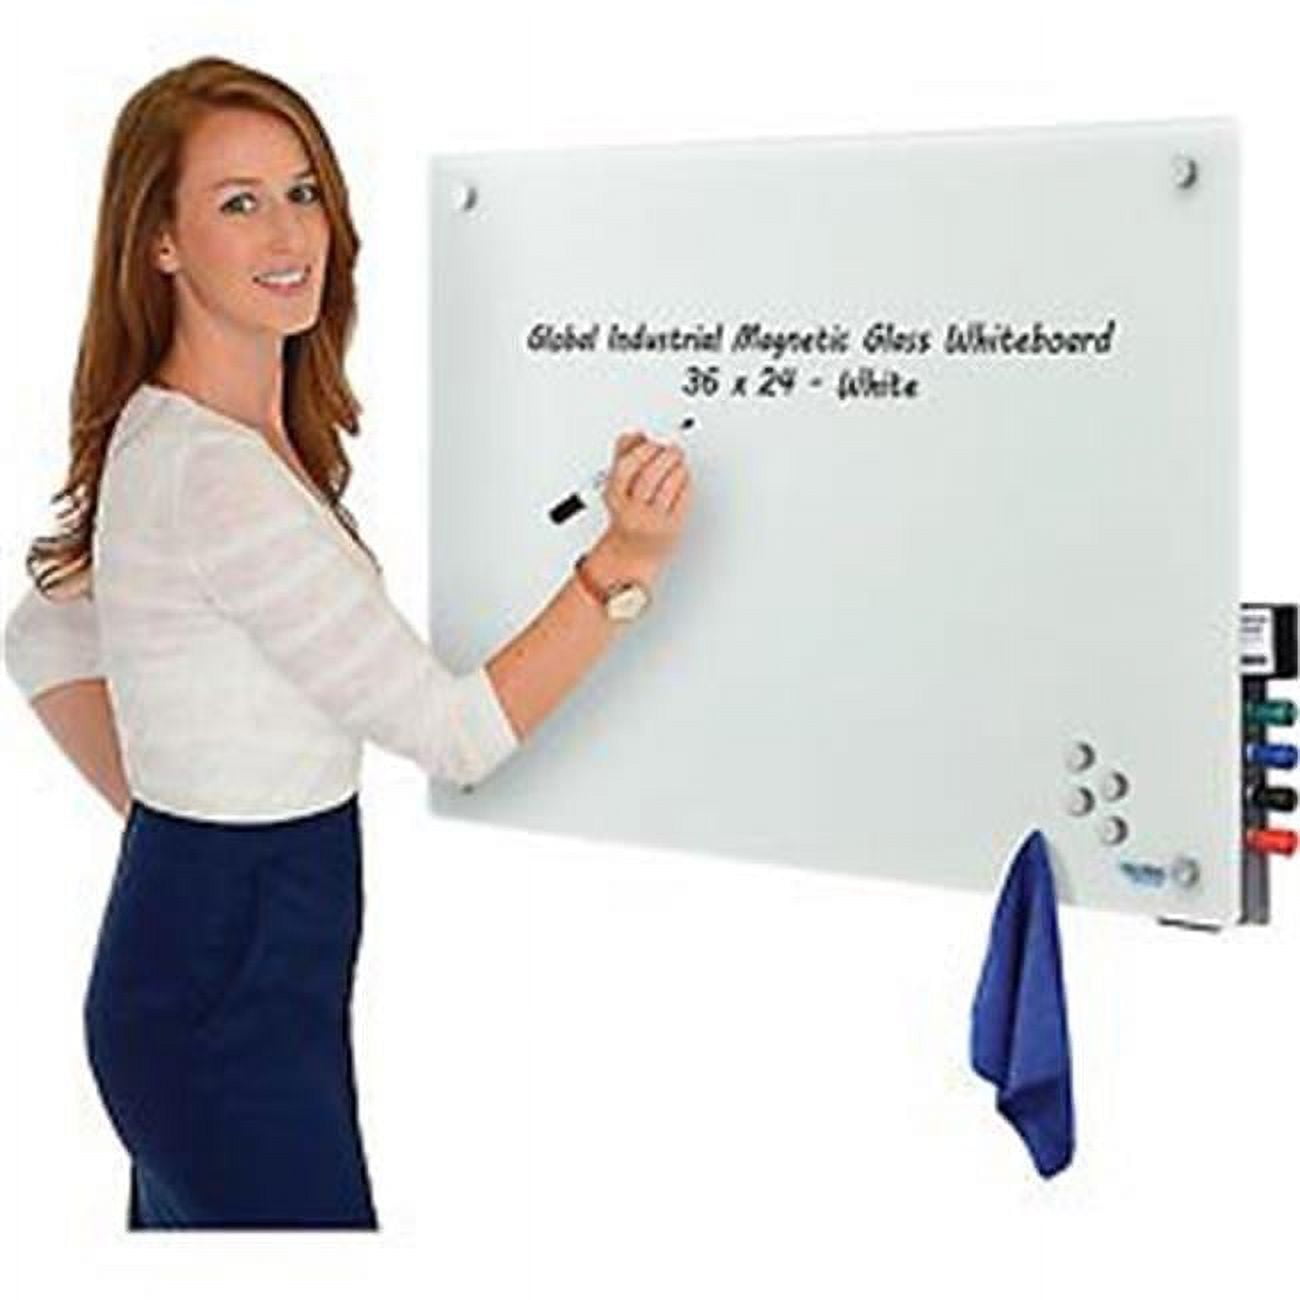 Vergo 4' x 3' Frosted White Glass Whiteboard